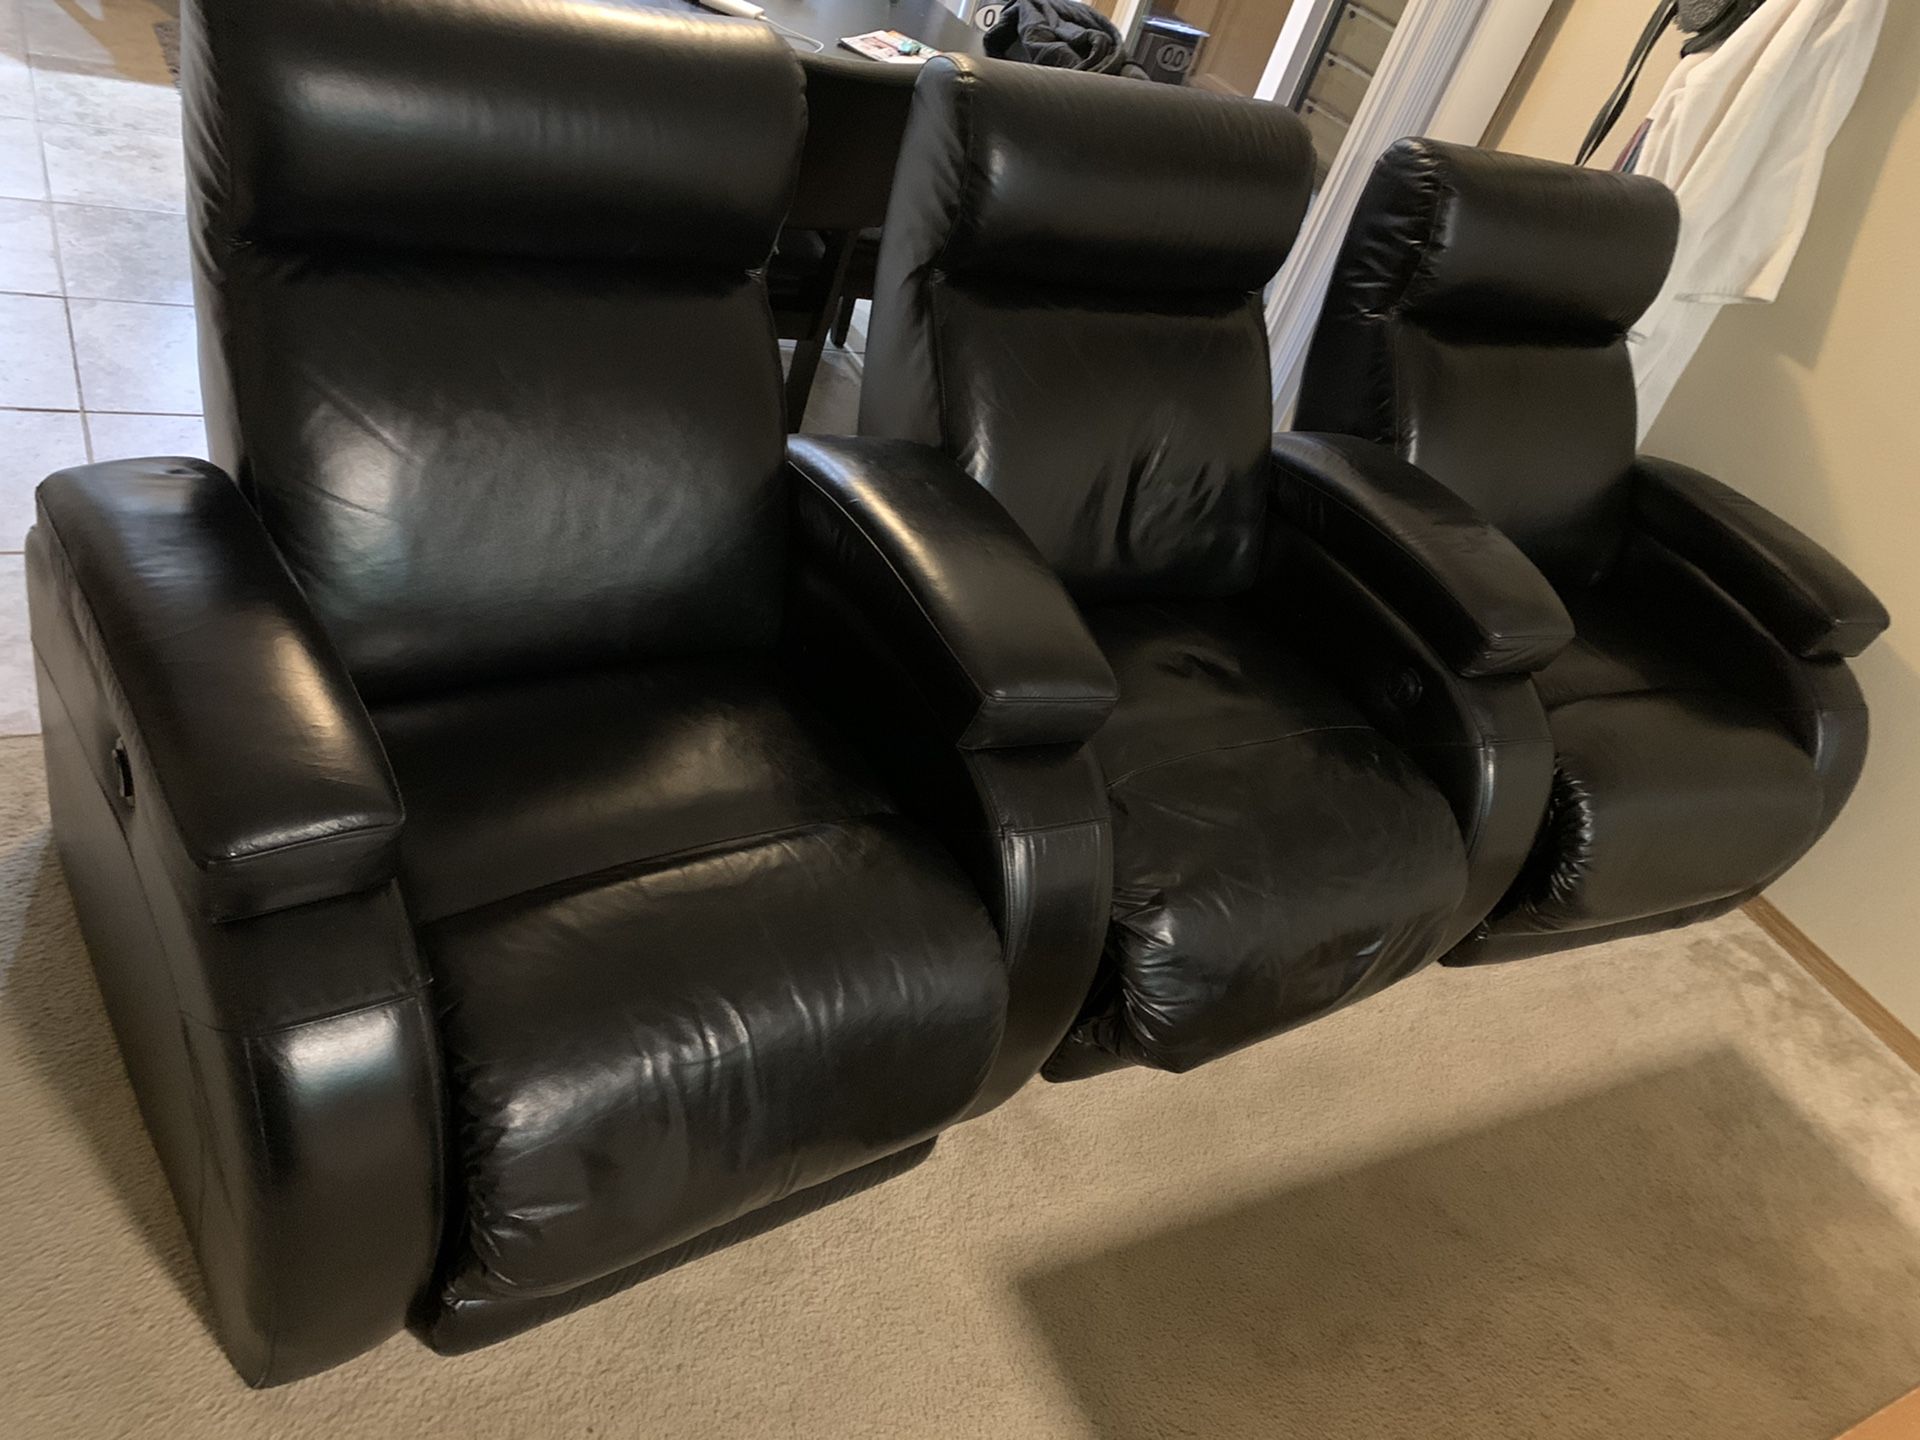 Power home theater recliners